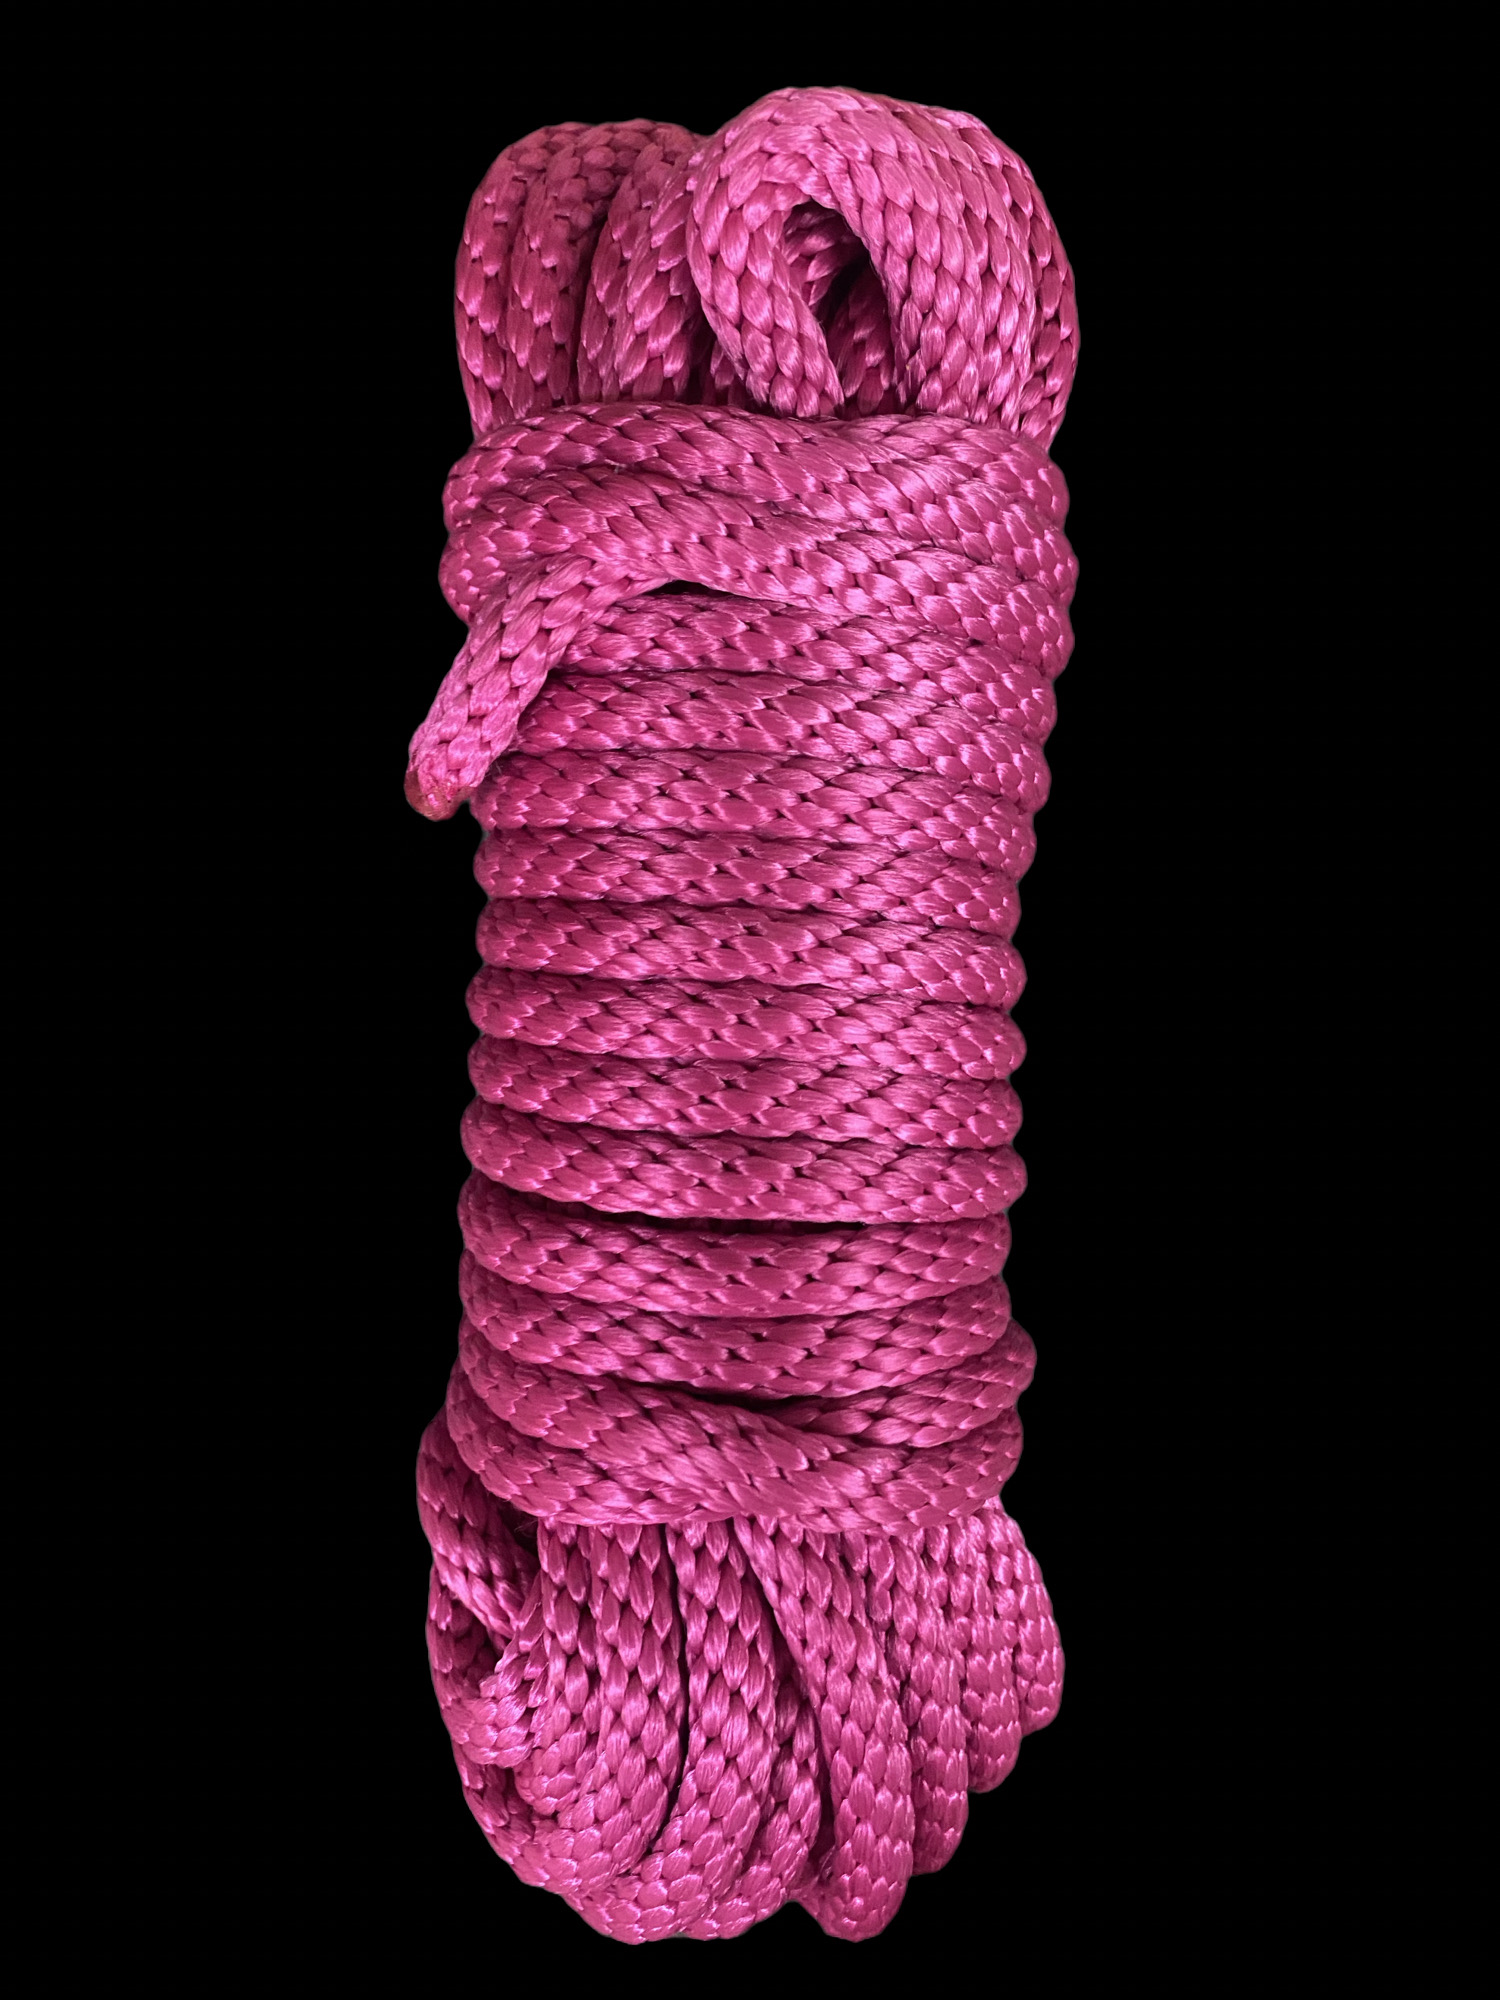 Utility Rope  Cancord Inc.